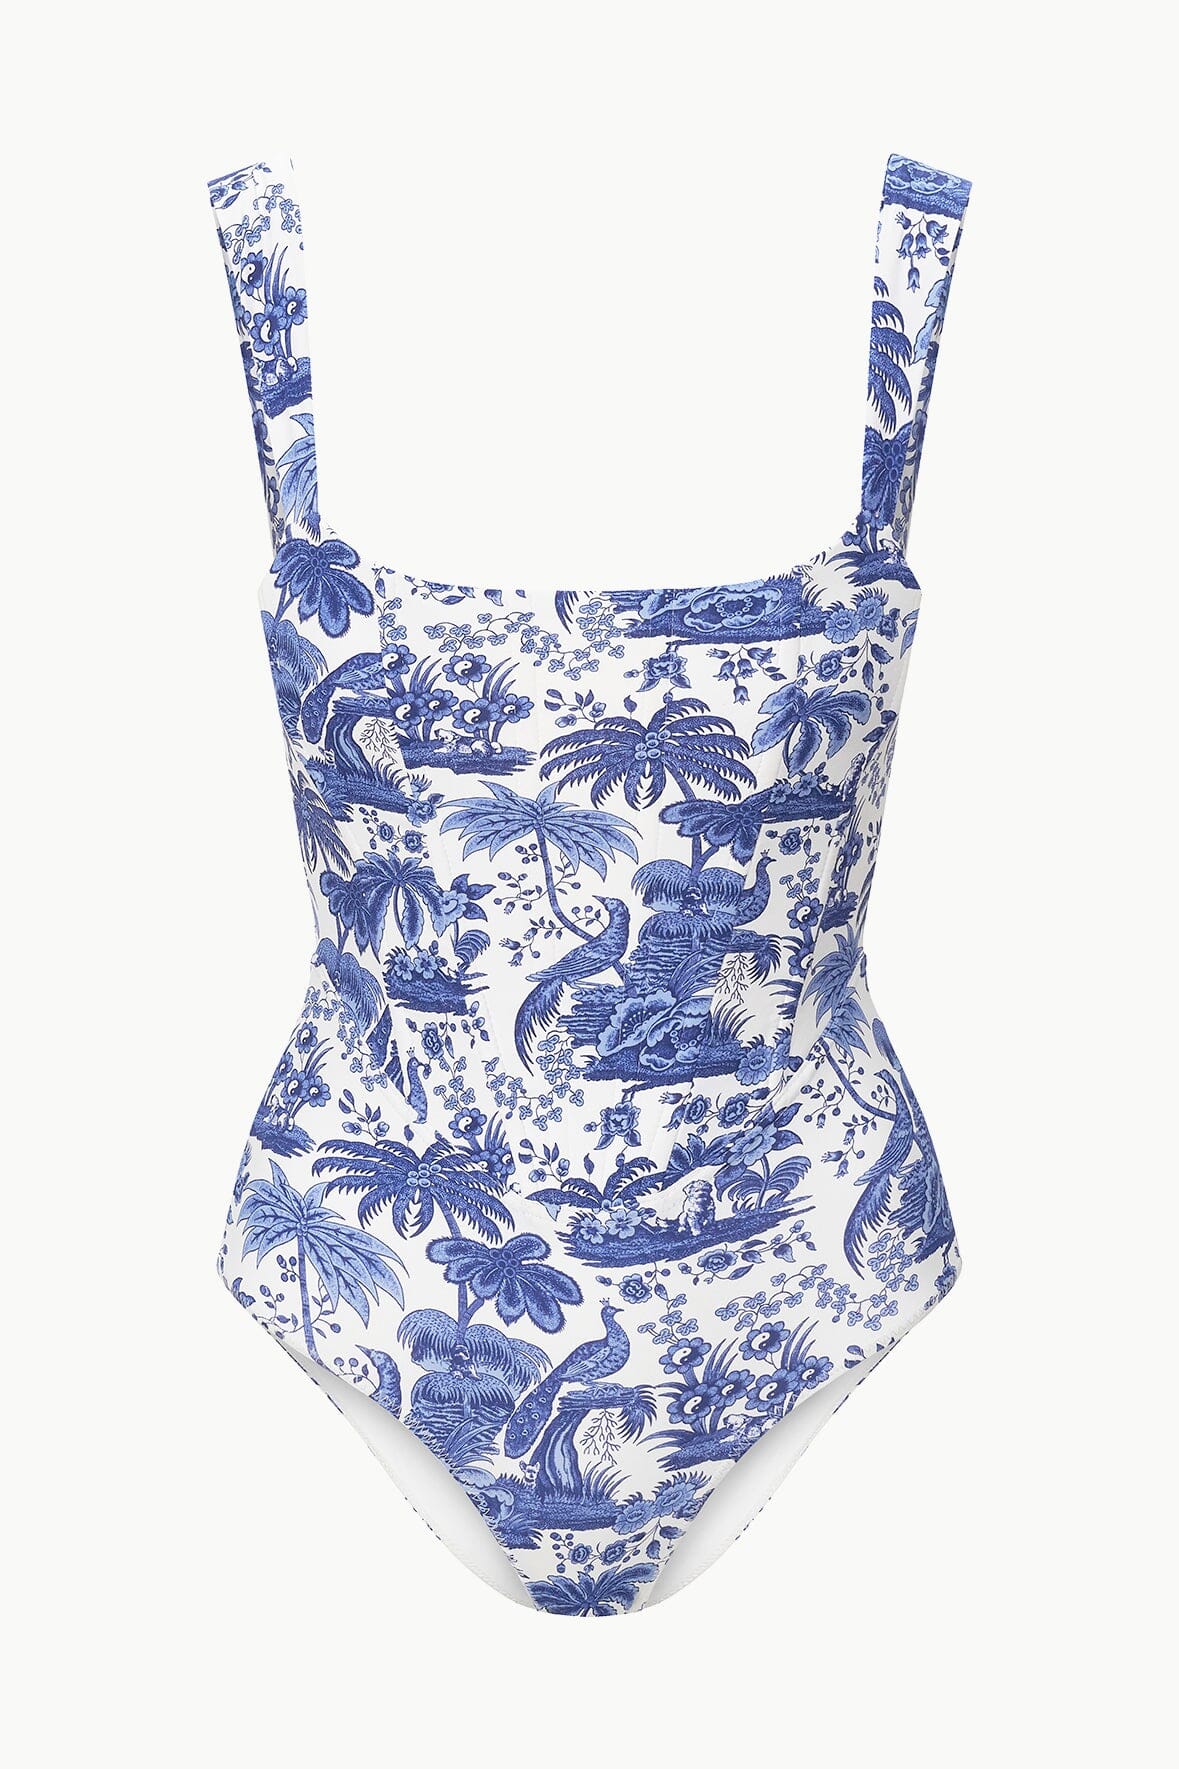 ADELAIDE ONE PIECE BLUE TOILE